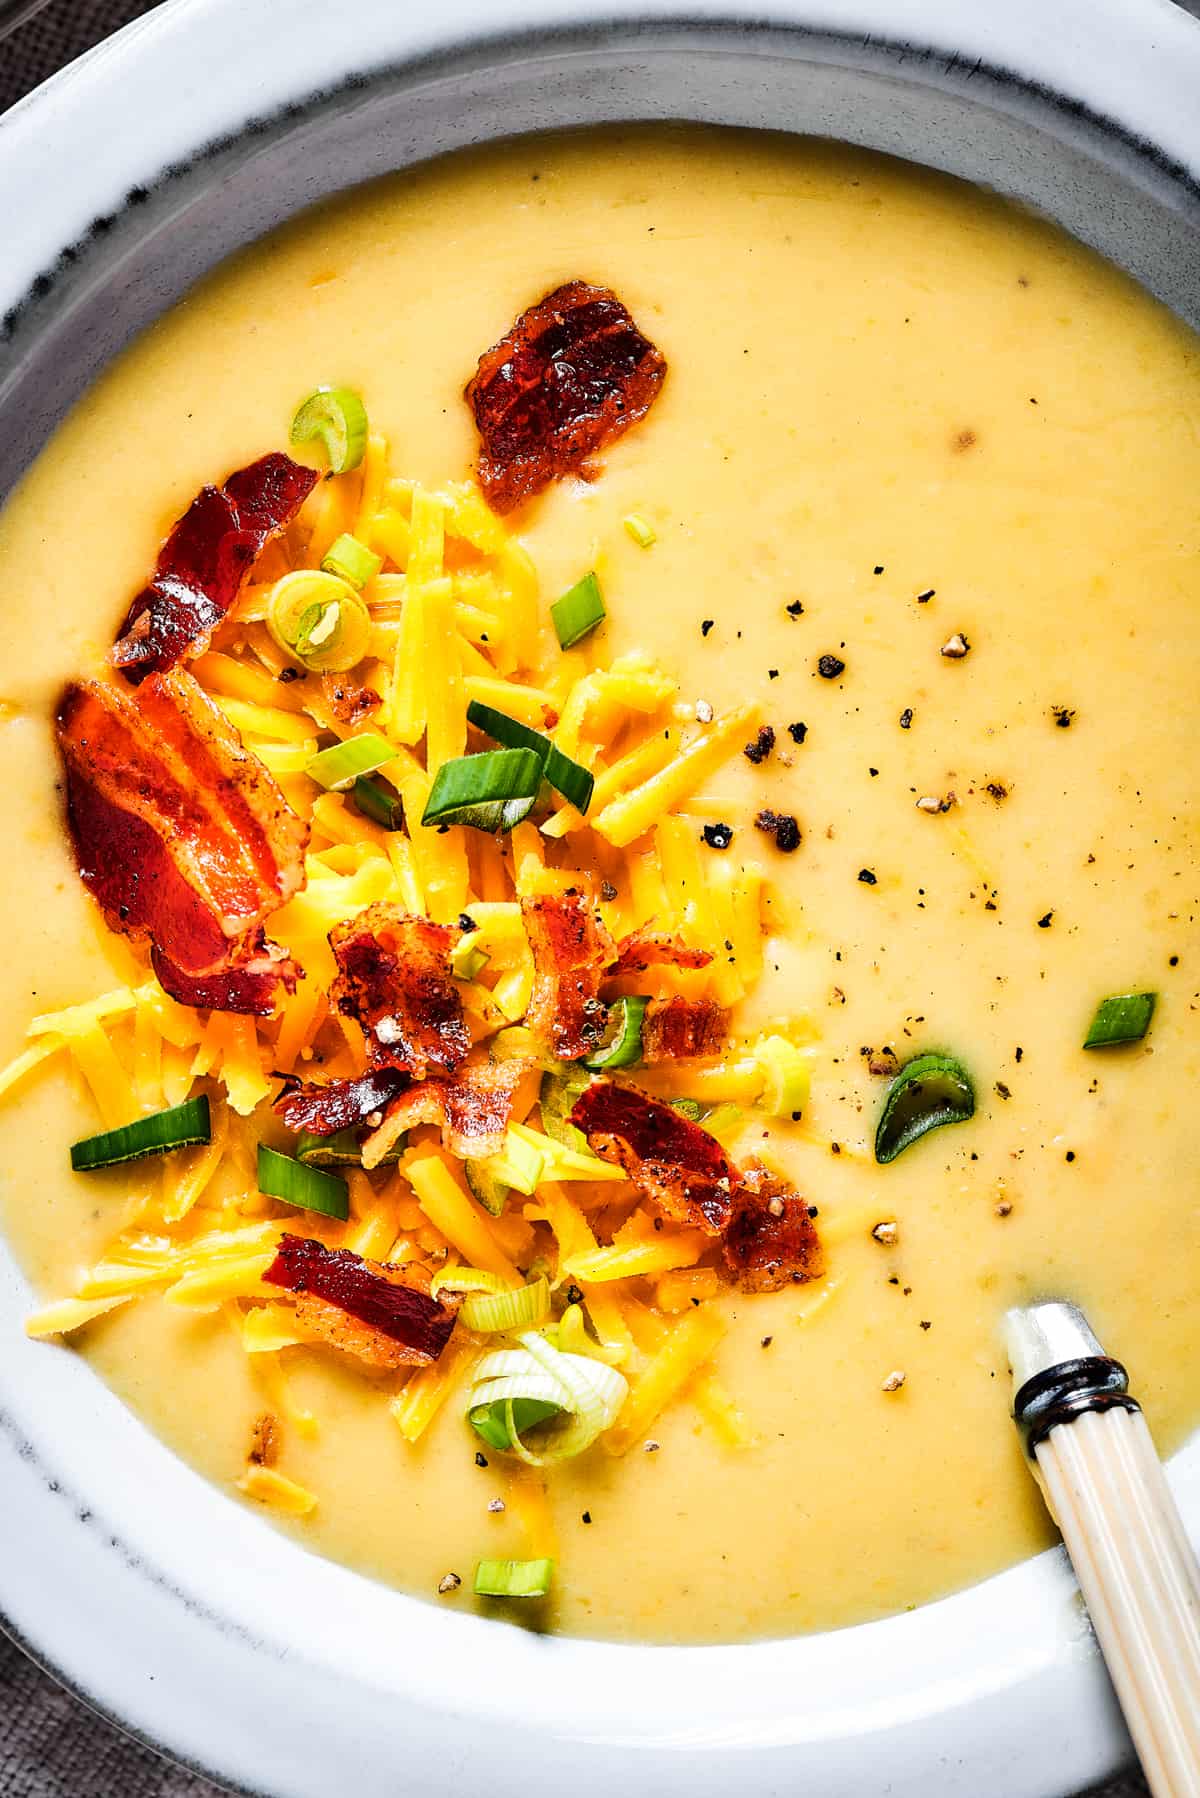 Close-up shot of bacon, green onions, and cheese sprinkled into a bowl of creamy soup.